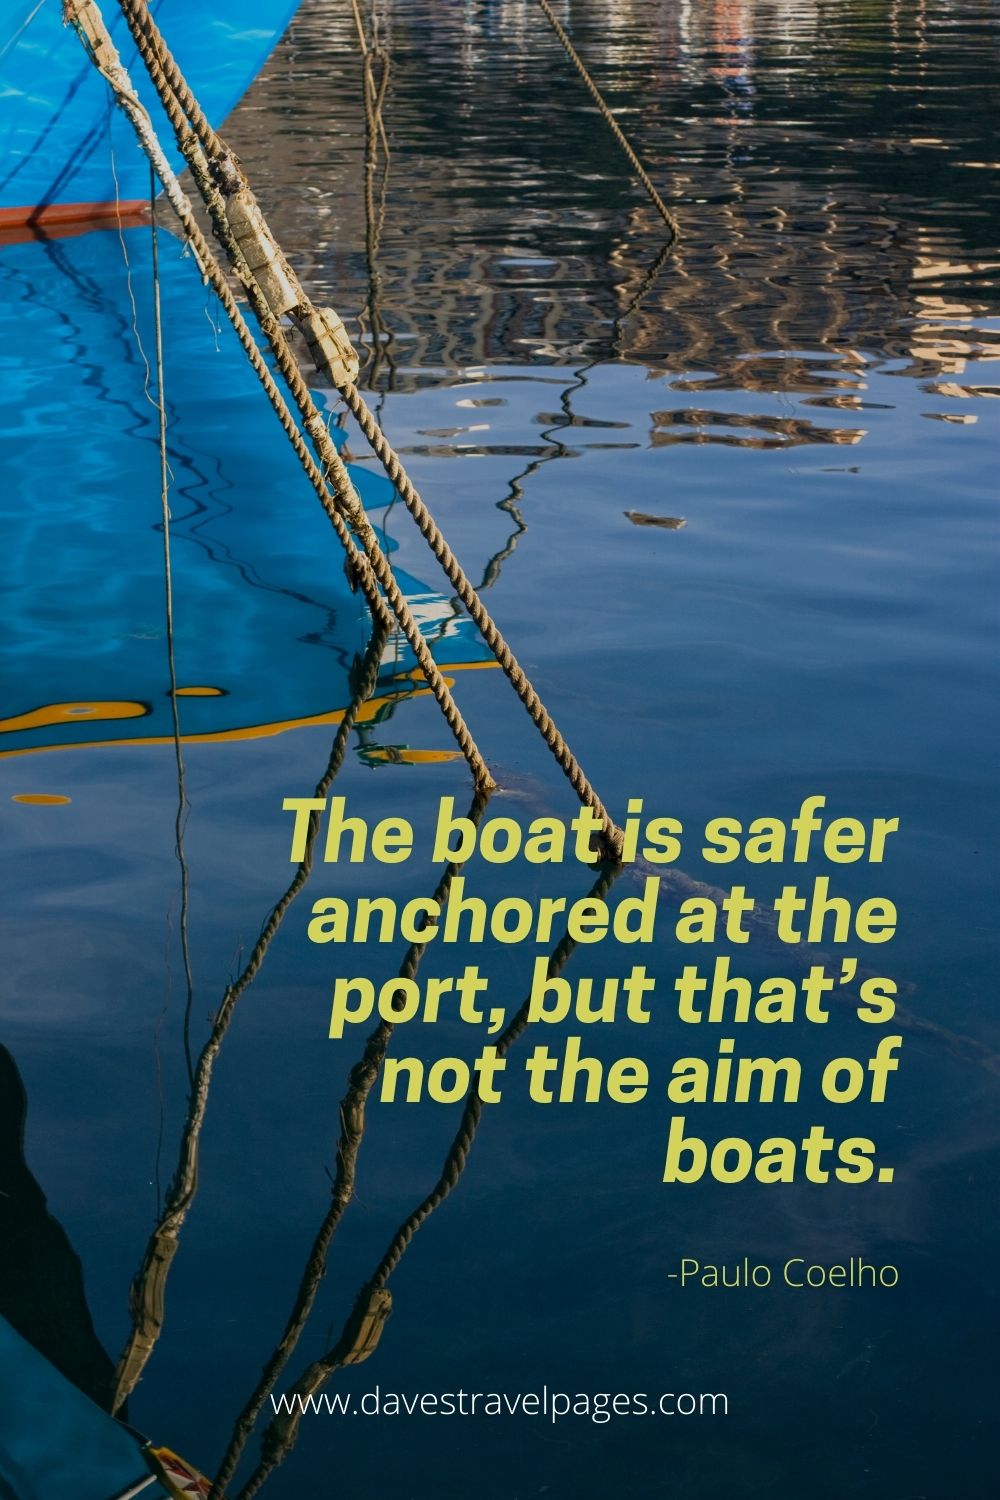 The boat is safer anchored at the port, but that’s not the aim of boats.